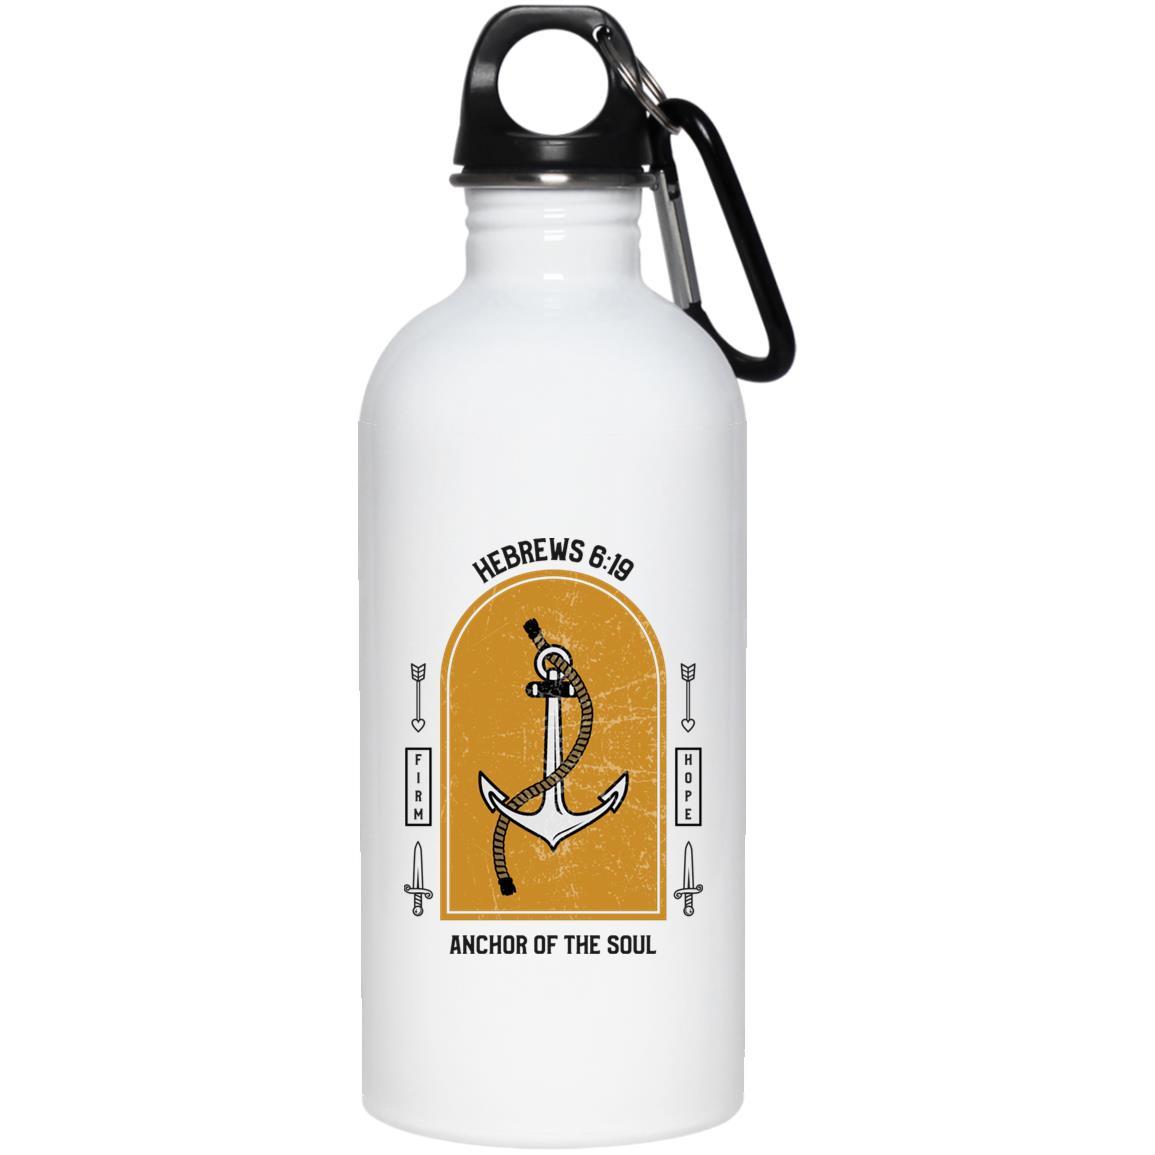 Anchor of the Soul (20oz Stainless Steel Water Bottle) - SDG Clothing